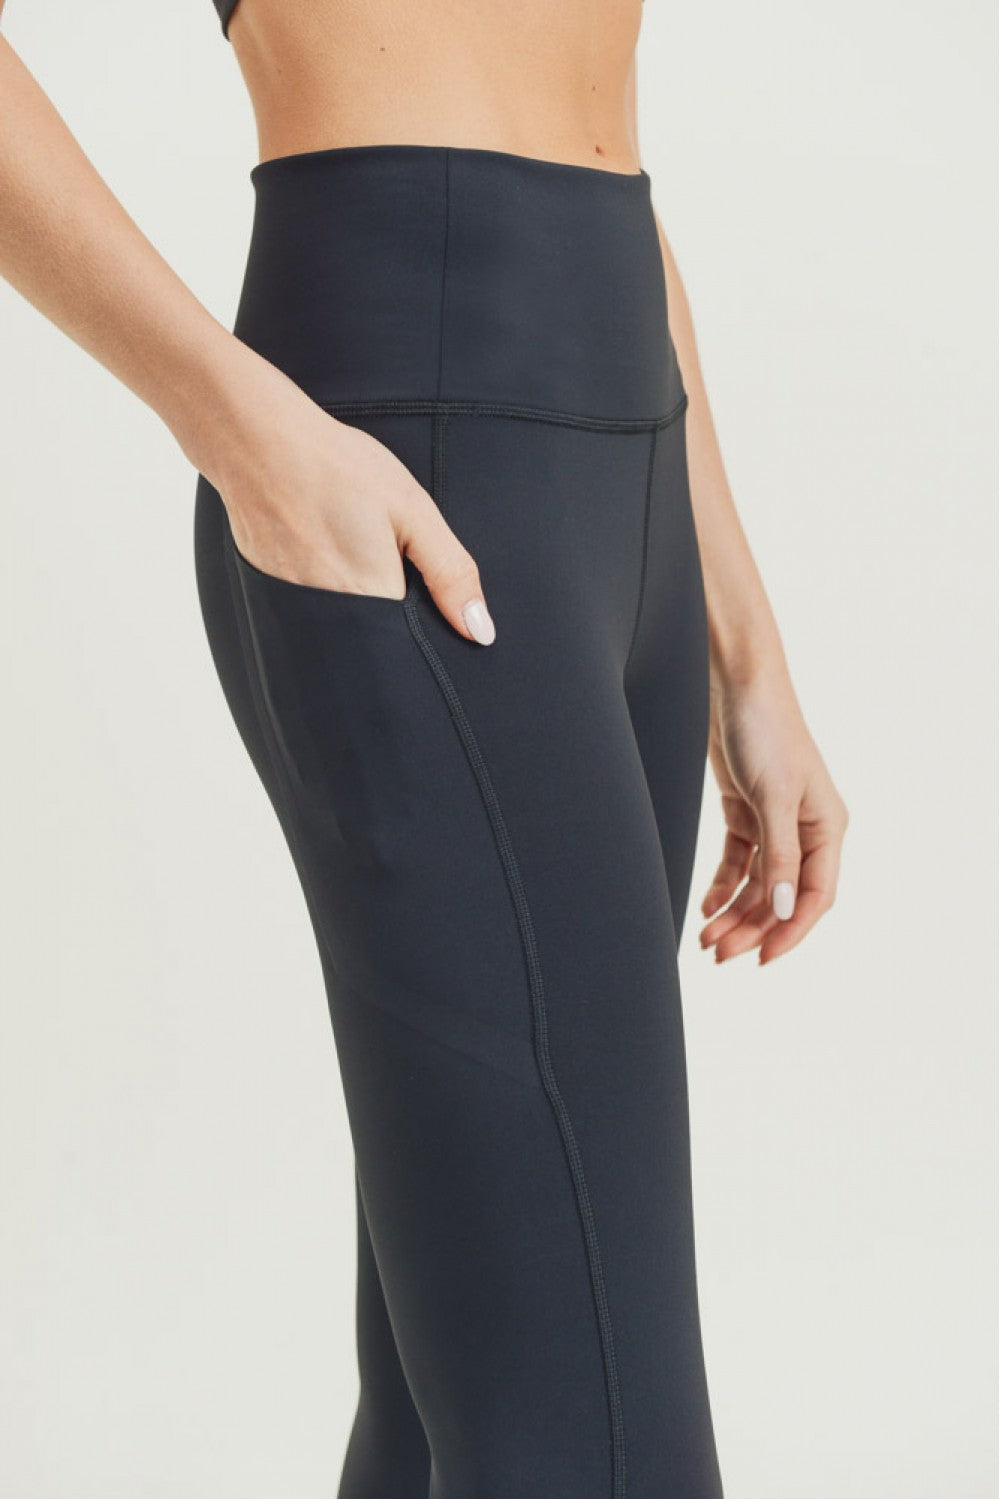 Laser-Cut and Bonded Essential Foldover High-Waisted Leggings